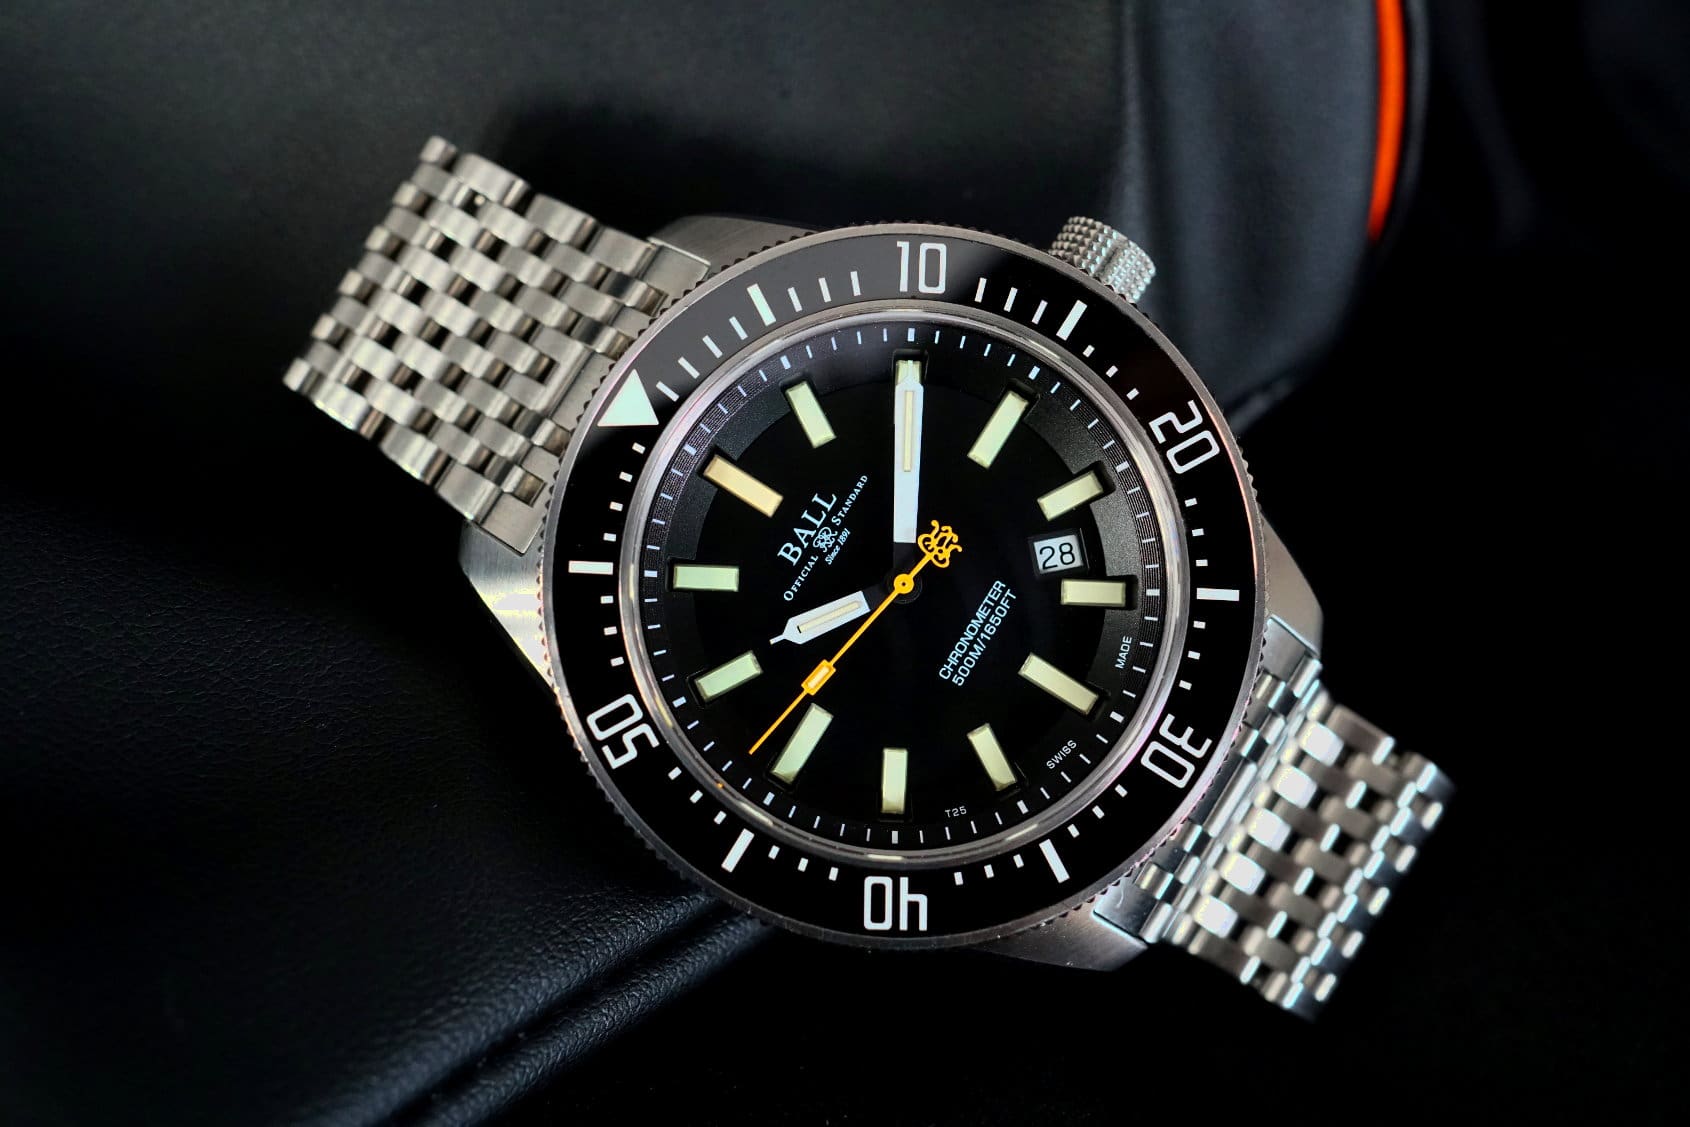 HANDS-ON: Vintage style, solid build and lume for days – the Ball Engineer Master II Skindiver II